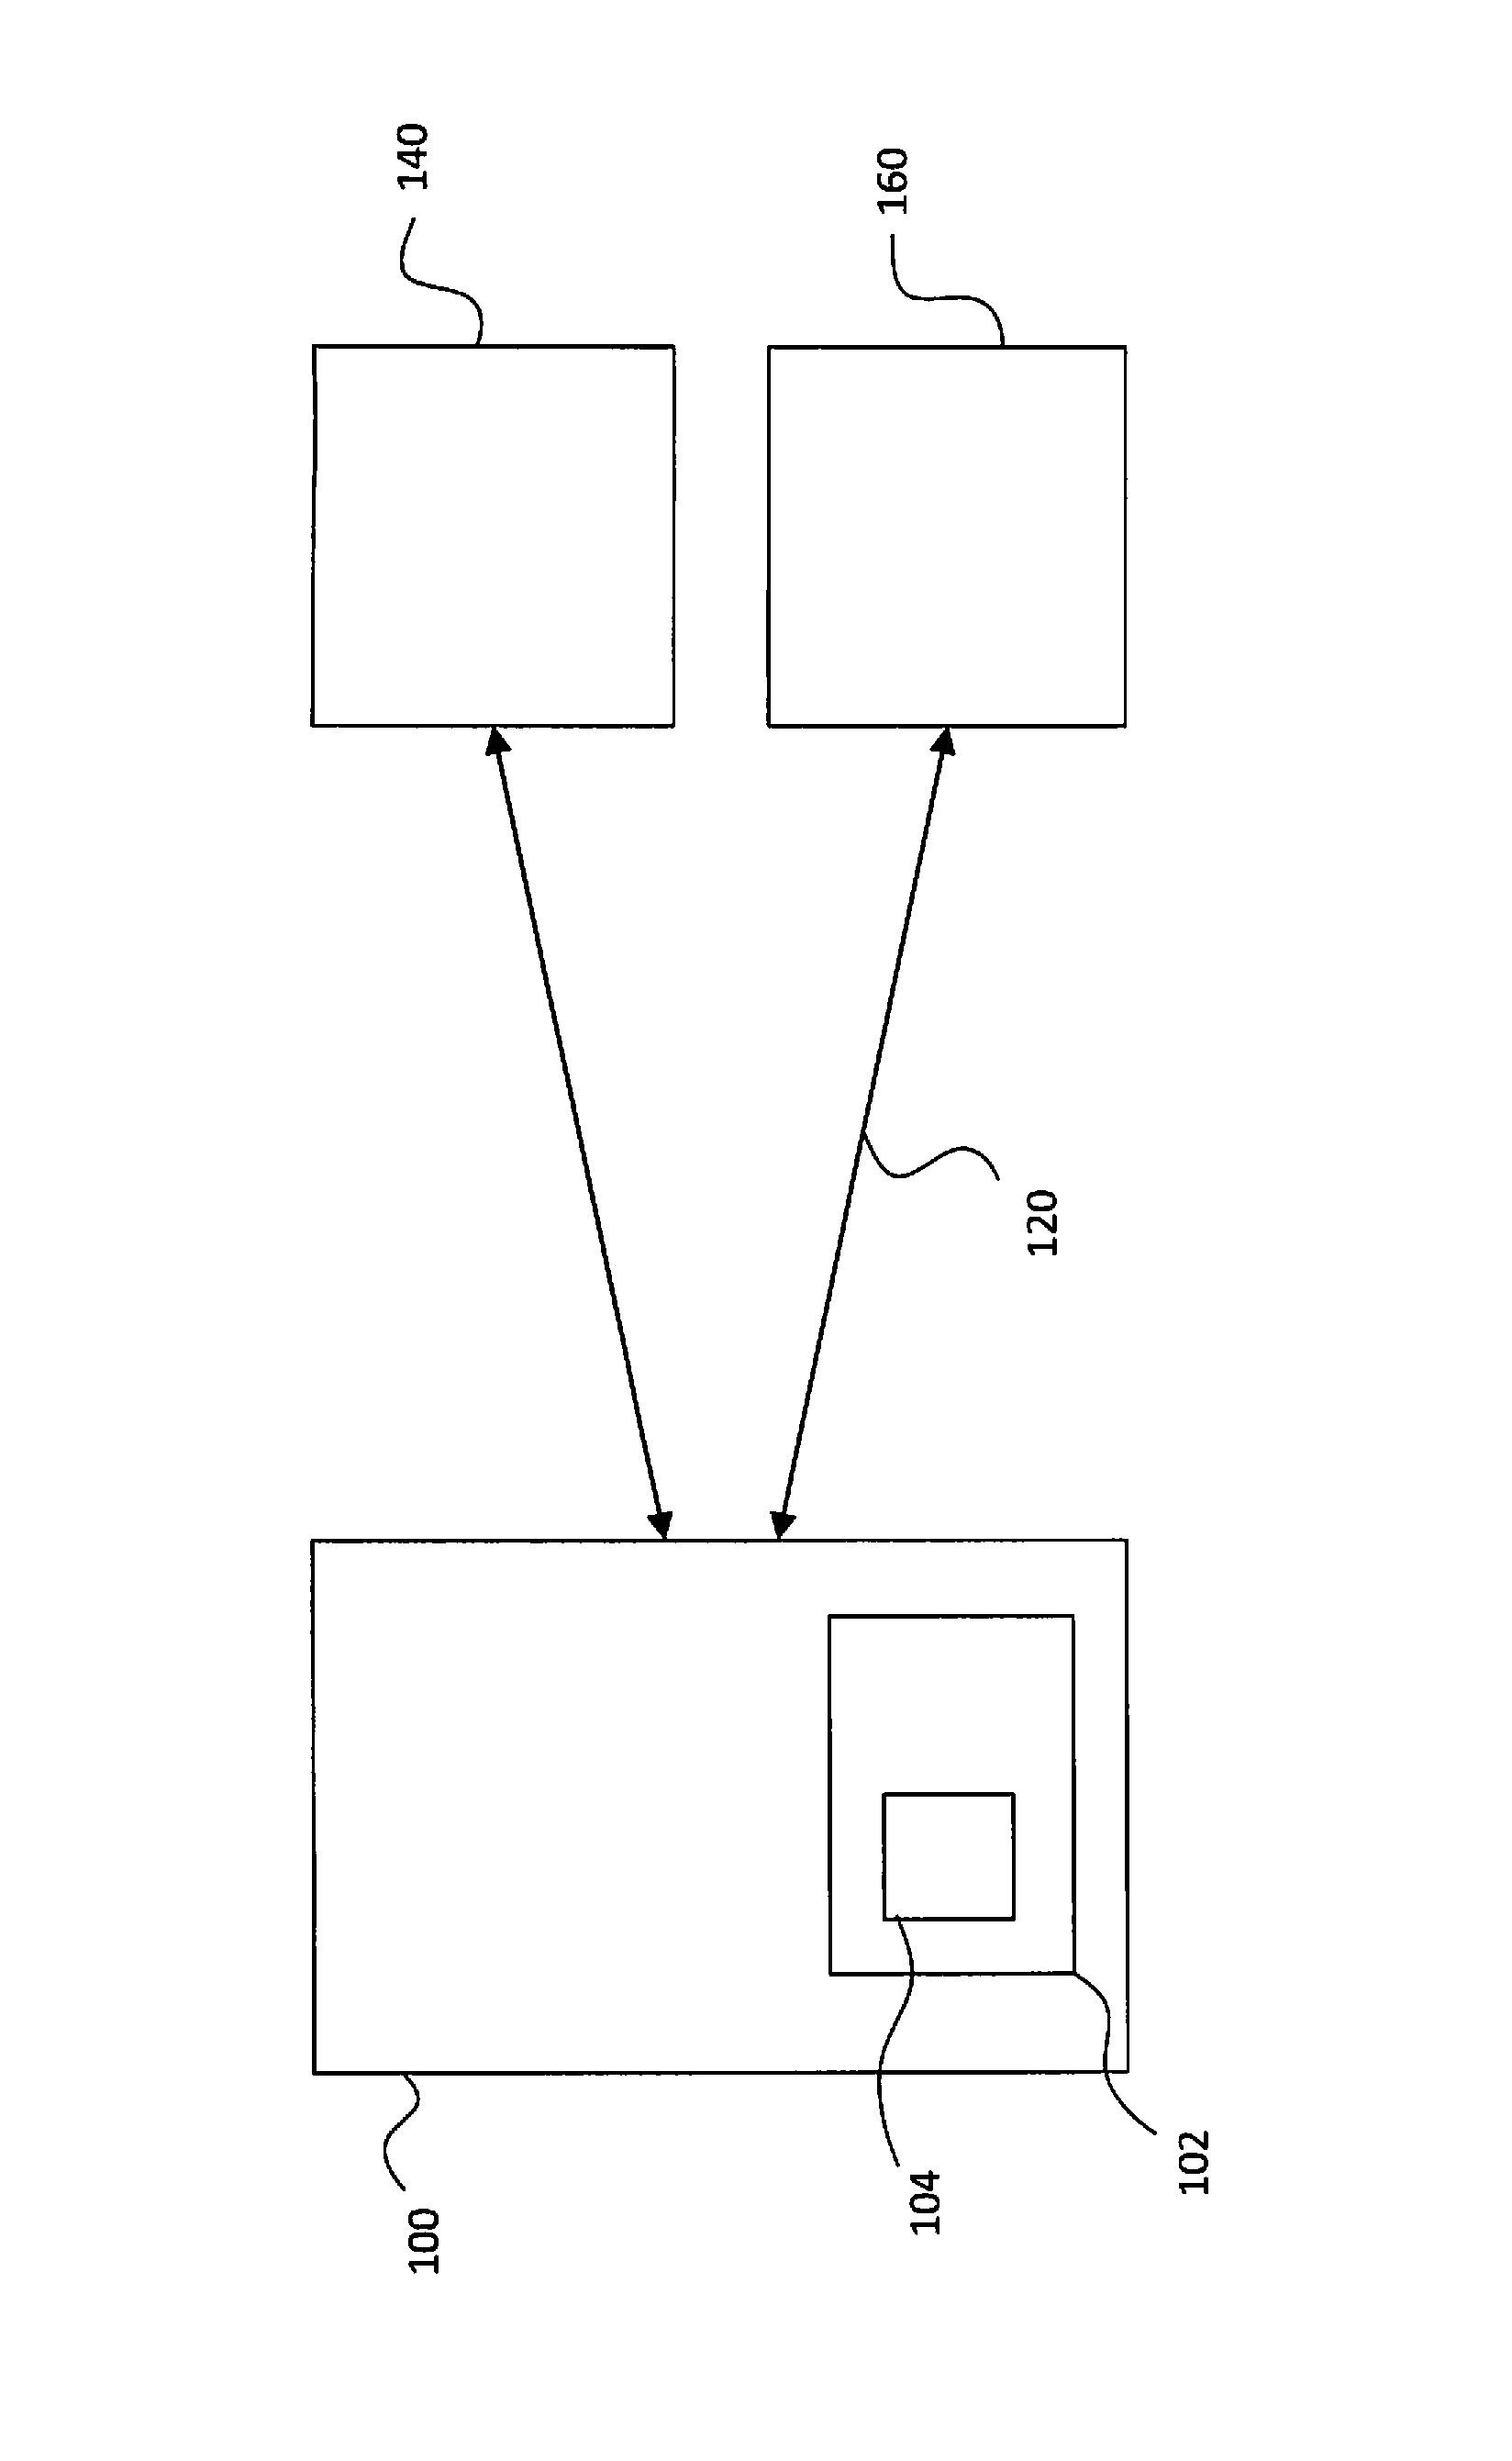 Method of securing a computing device